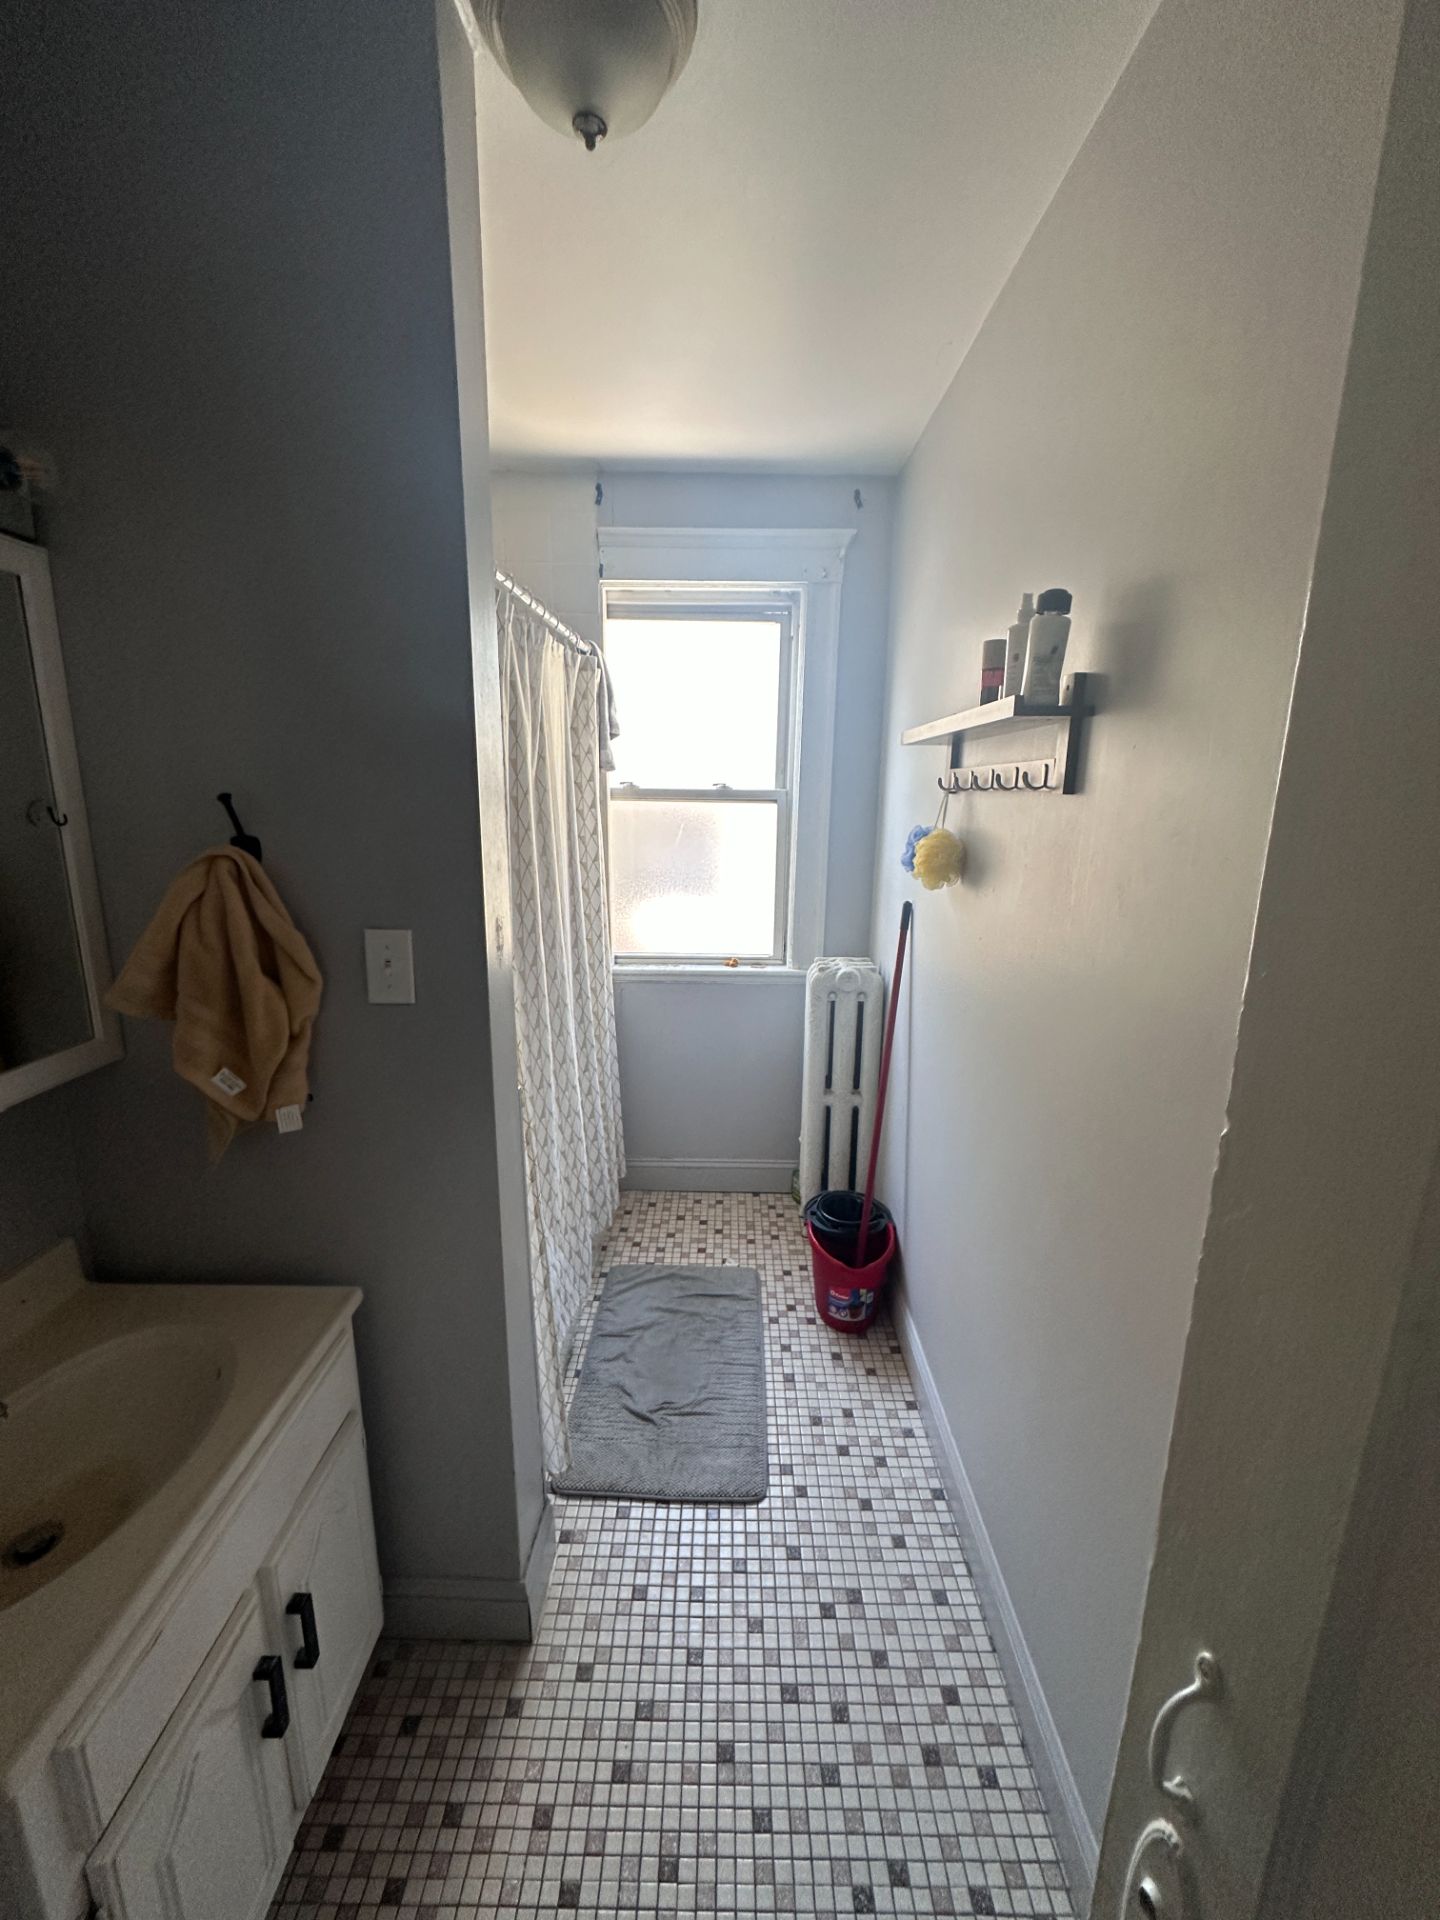 Photos of apartment on Columbus Ave.,Somerville MA 02143